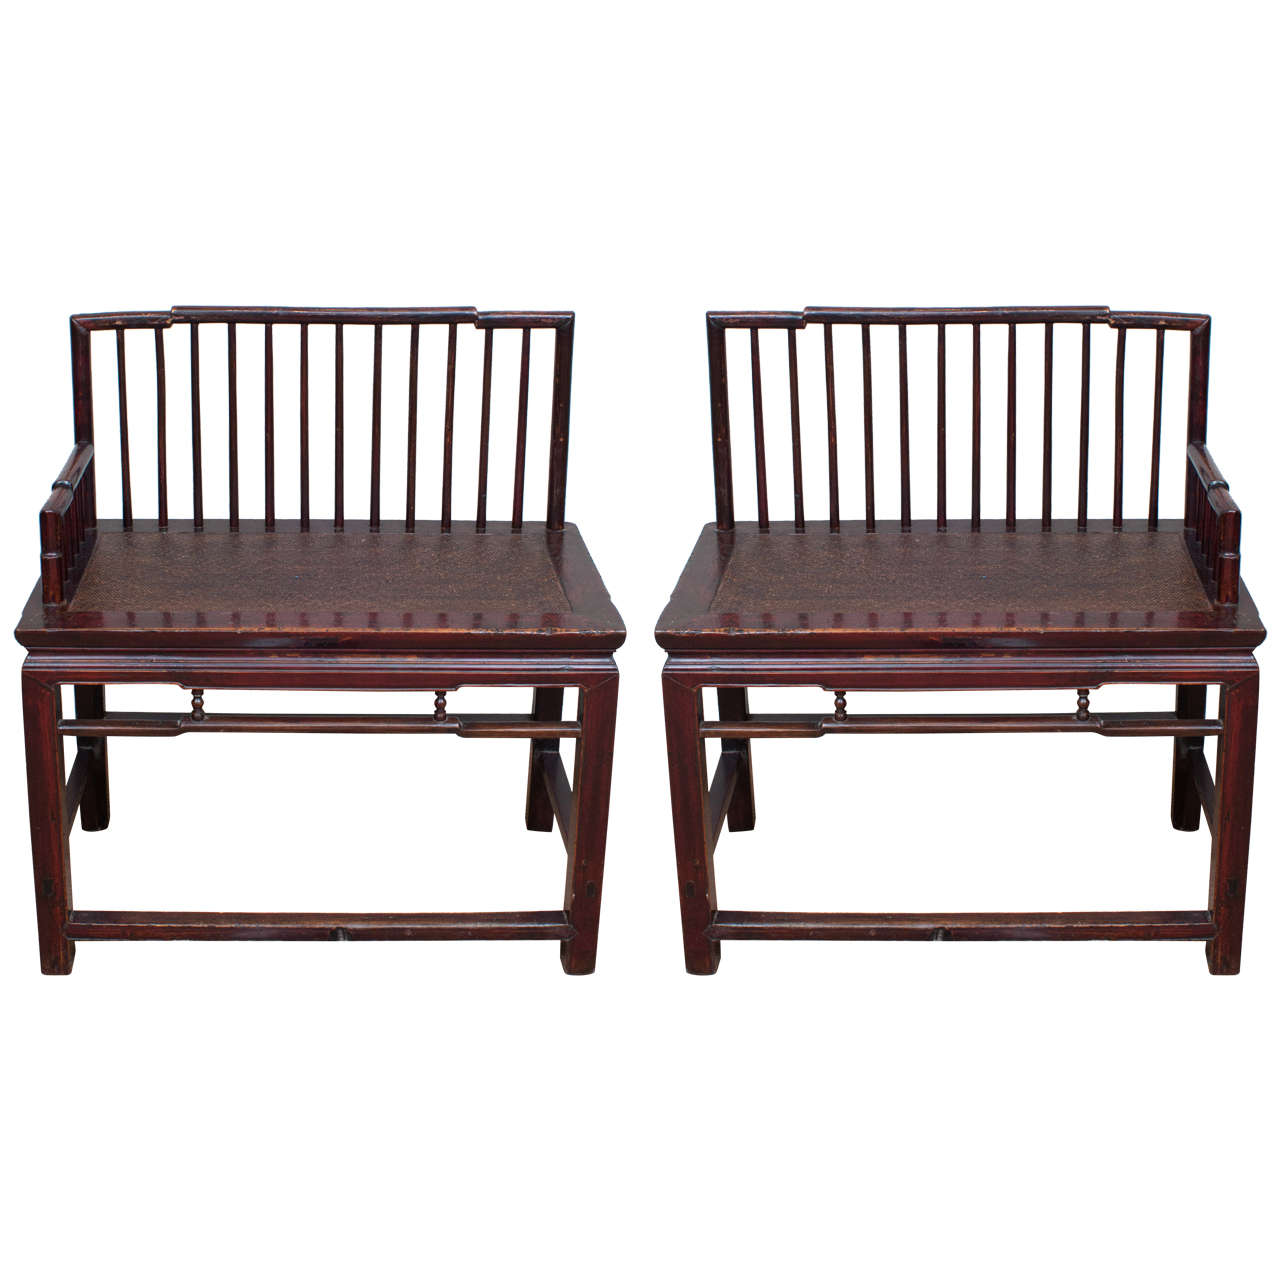 Pair of Rare 19th Century Chinese Spindle Back Benches For Sale